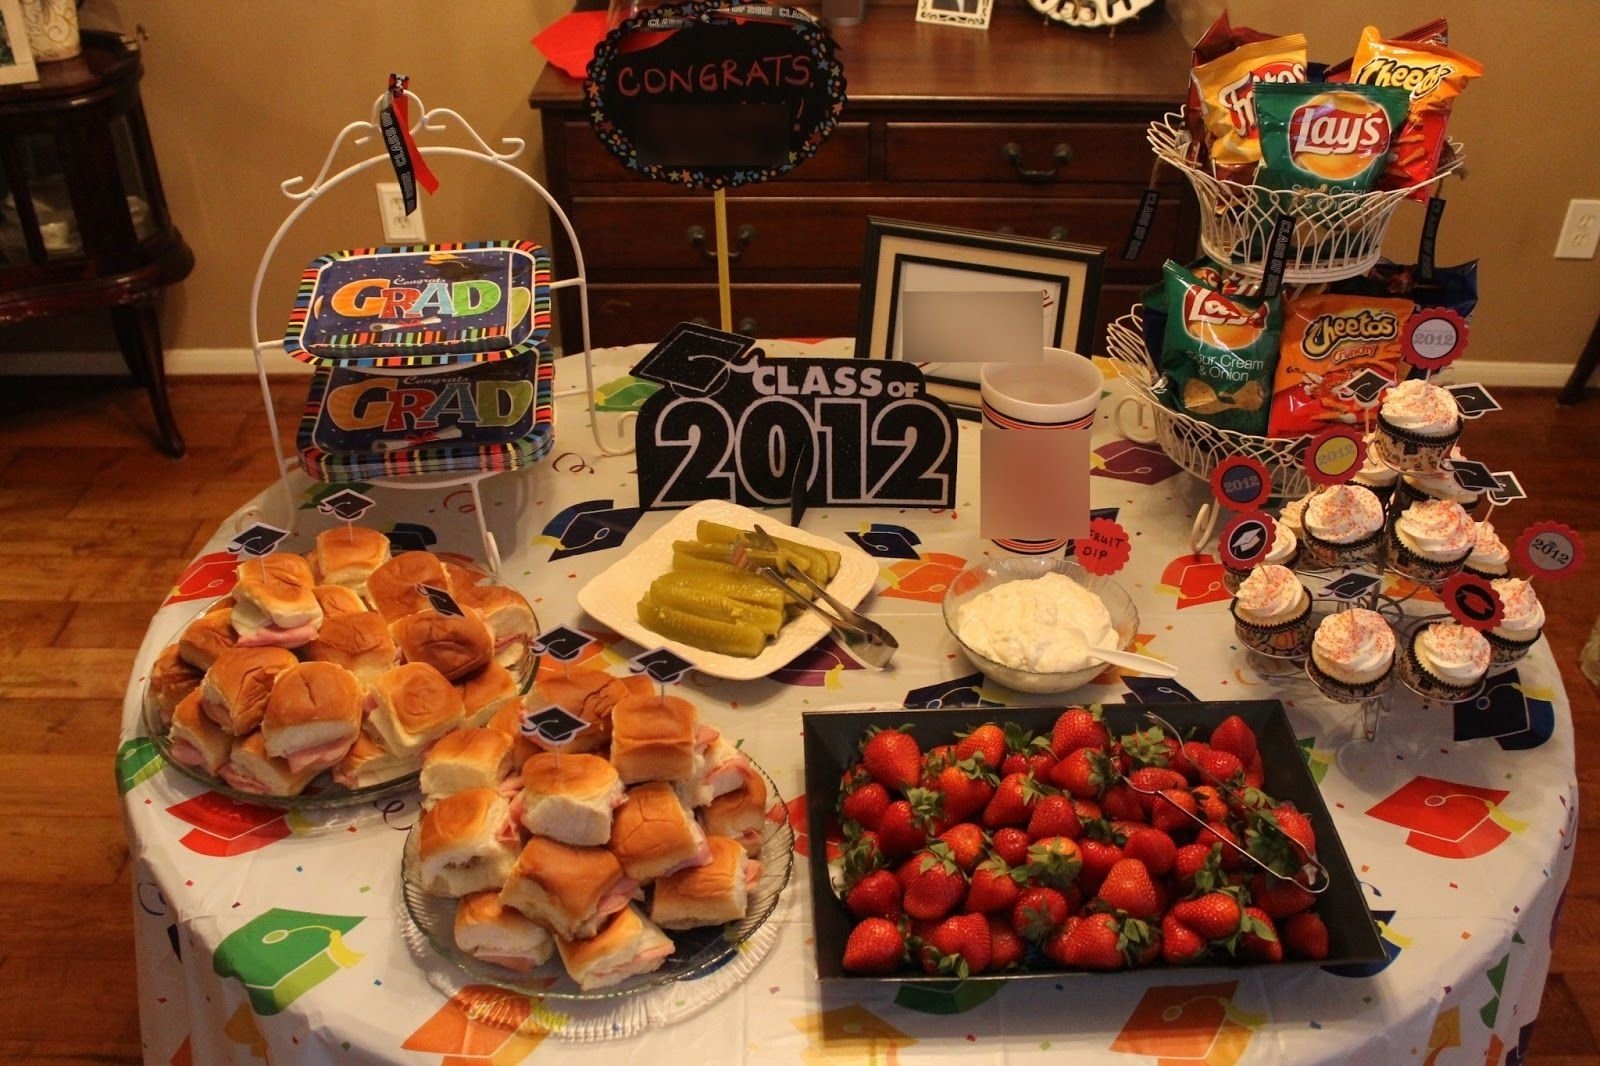 10 Nice Graduation Party Food Ideas Cheap graduation decoration ideas this is just a simple banner i 9 2022